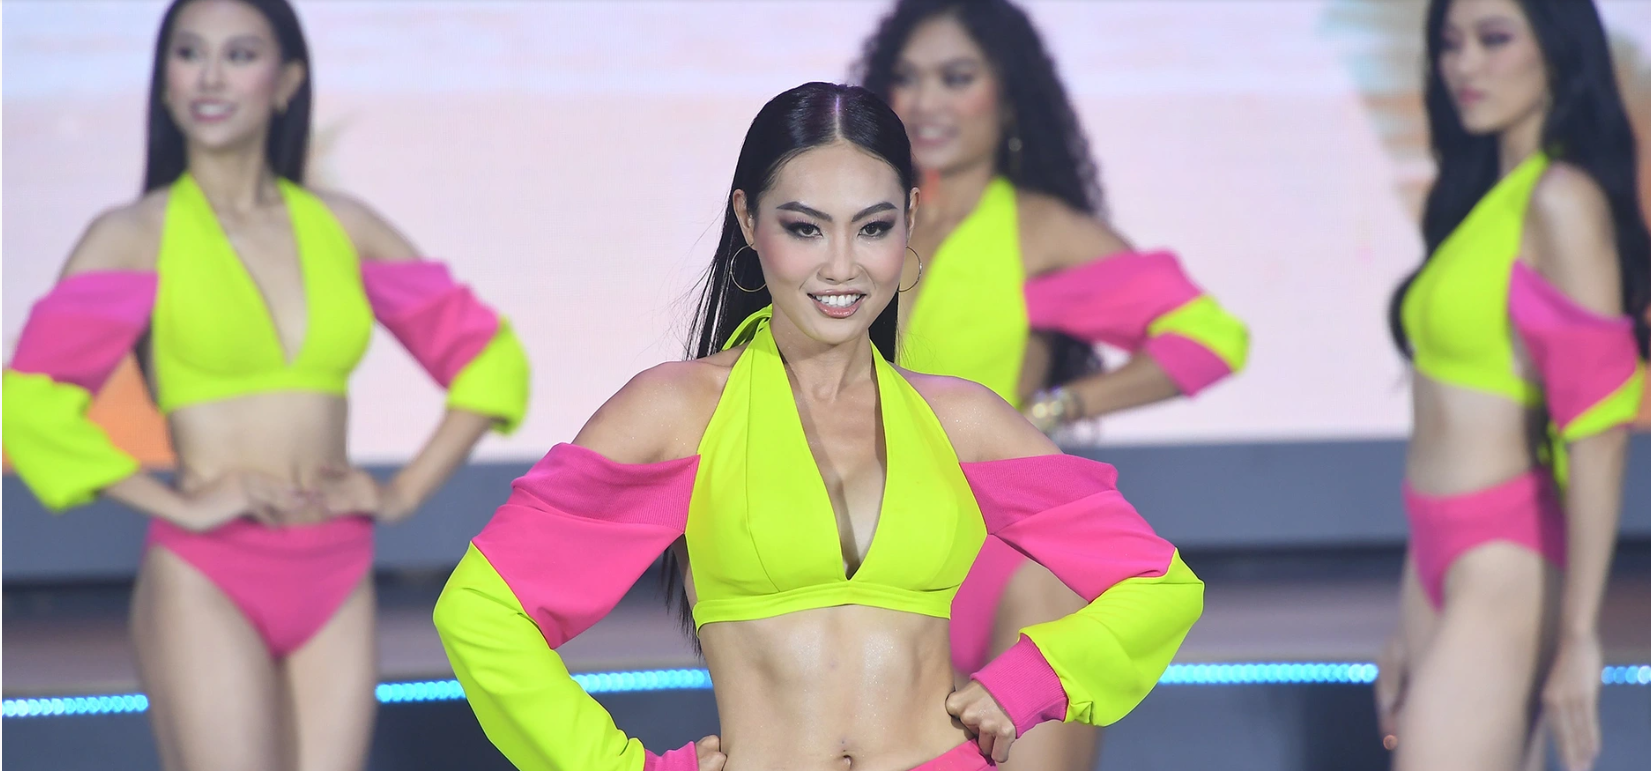 VietNam – Showbiz – The “fiery” bodies of the Miss Sports contestants in the bikini section